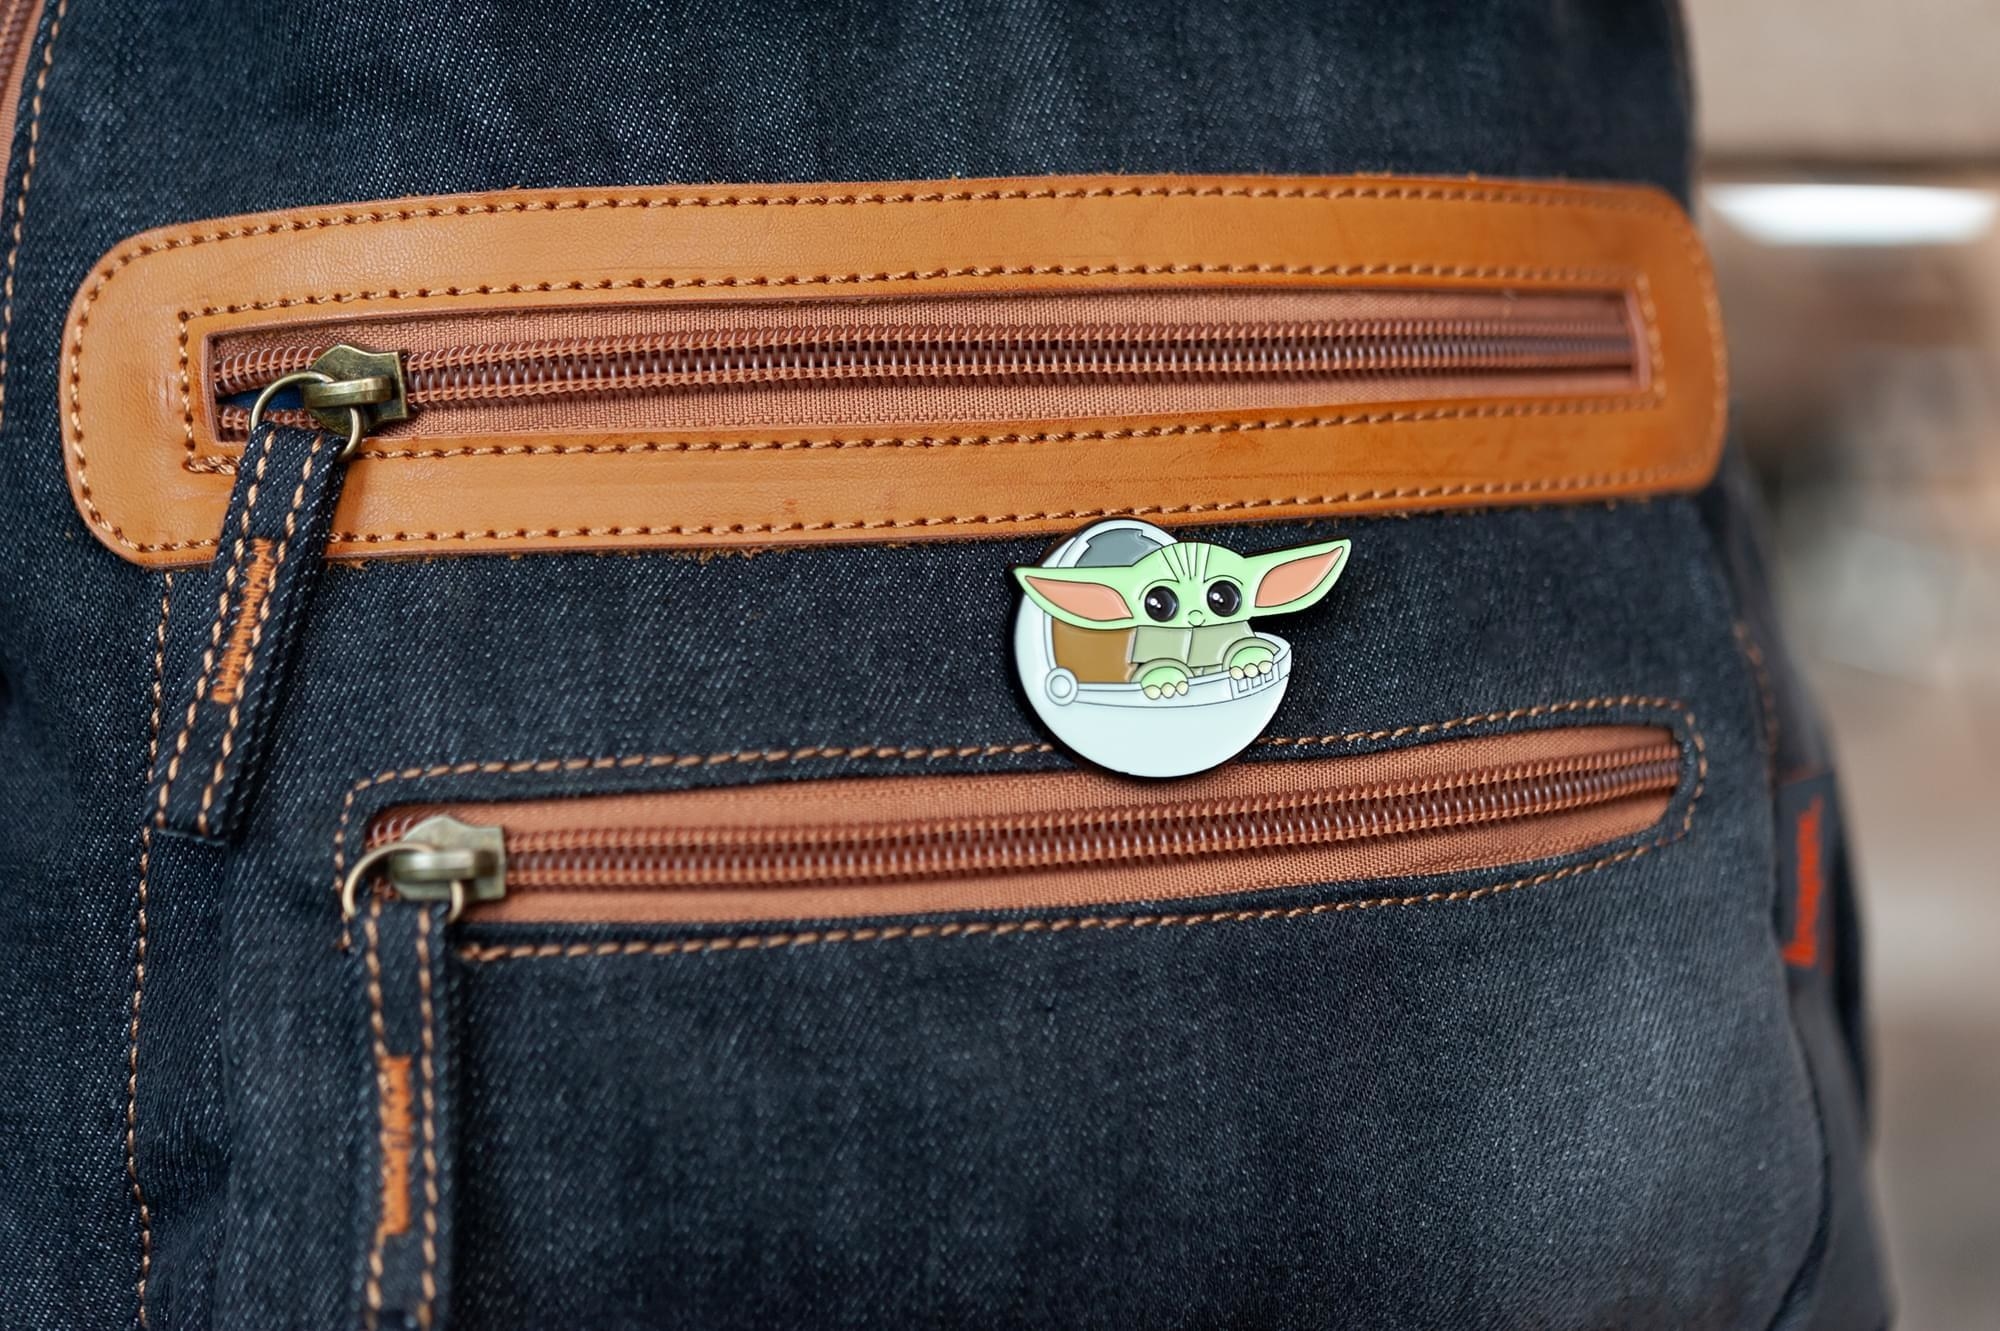 The pin on a backpack